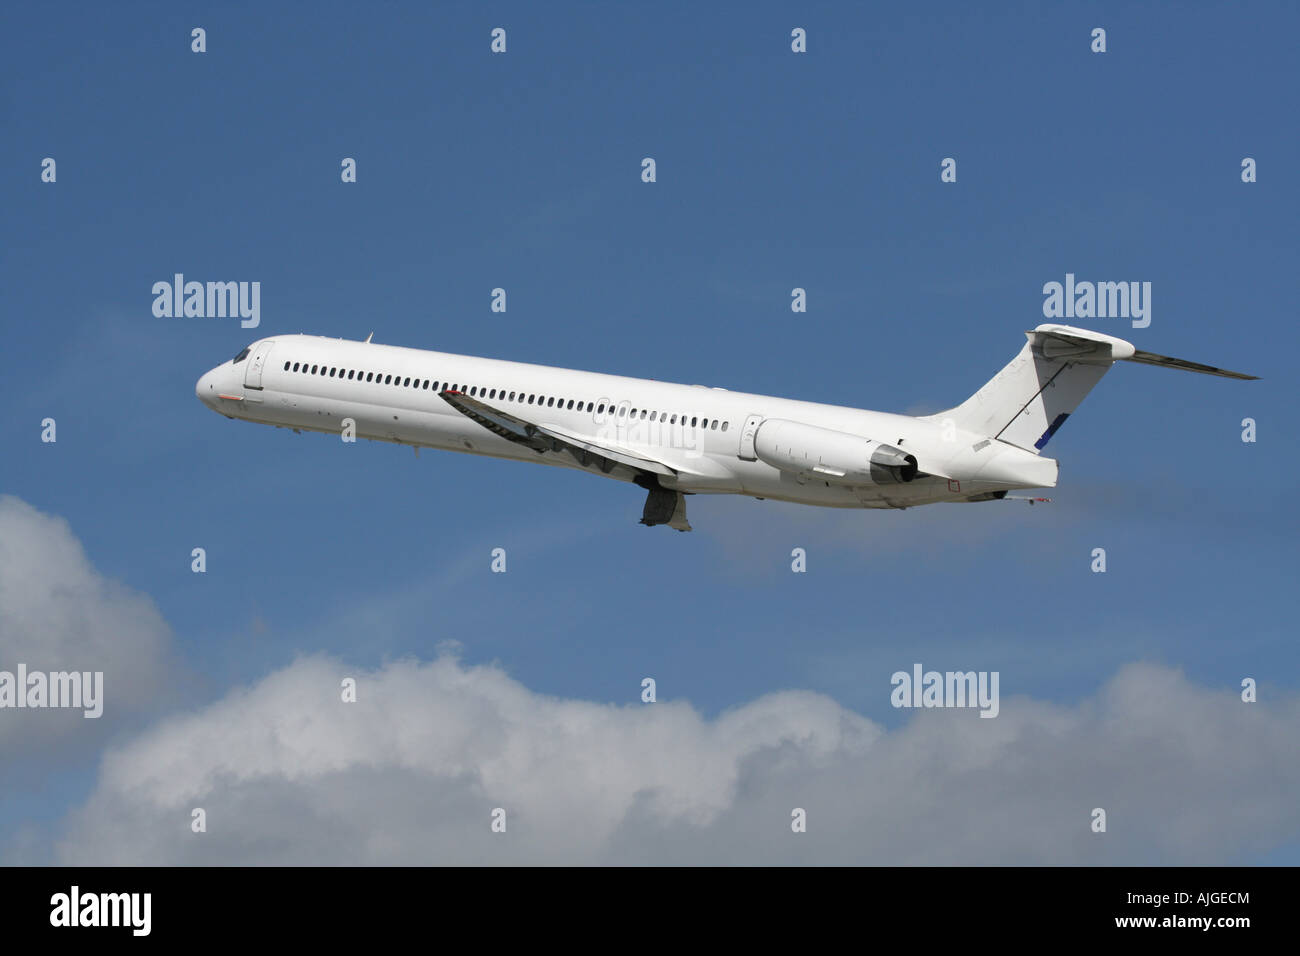 Commercial air travel. McDonnell Douglas MD-83 passenger jet plane in the air. No livery and proprietary markings removed. Stock Photo